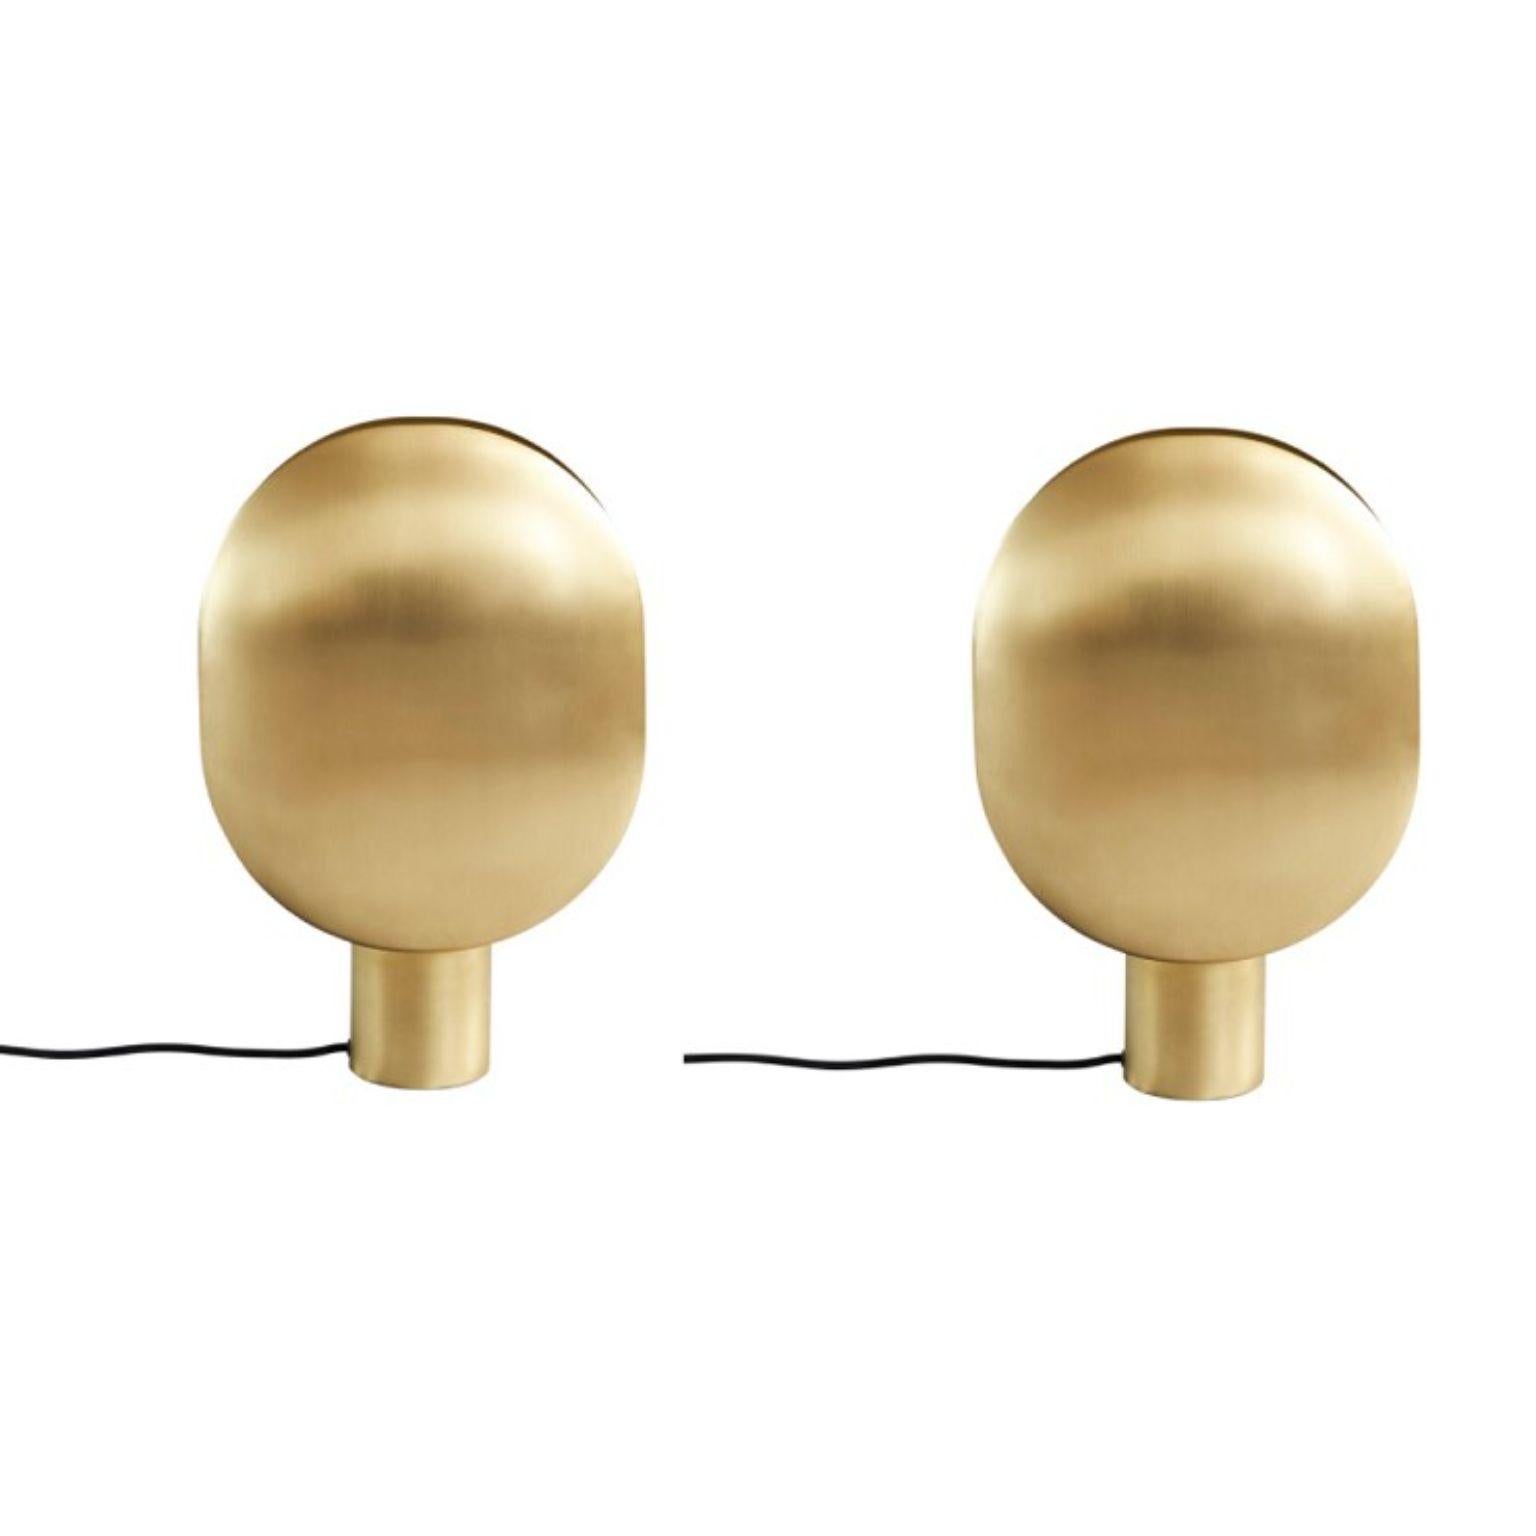 Set of 2 brass clam table lamps by 101 Copenhagen
Designed by Kristian Sofus Hansen & Tommy Hyldahl
Dimensions: L 30 x W 15 x H 43,5 cm
Cable length: 200 cm
This product is not wired for USA
Materials: metal: plated metal / brass
Cable: Fabric